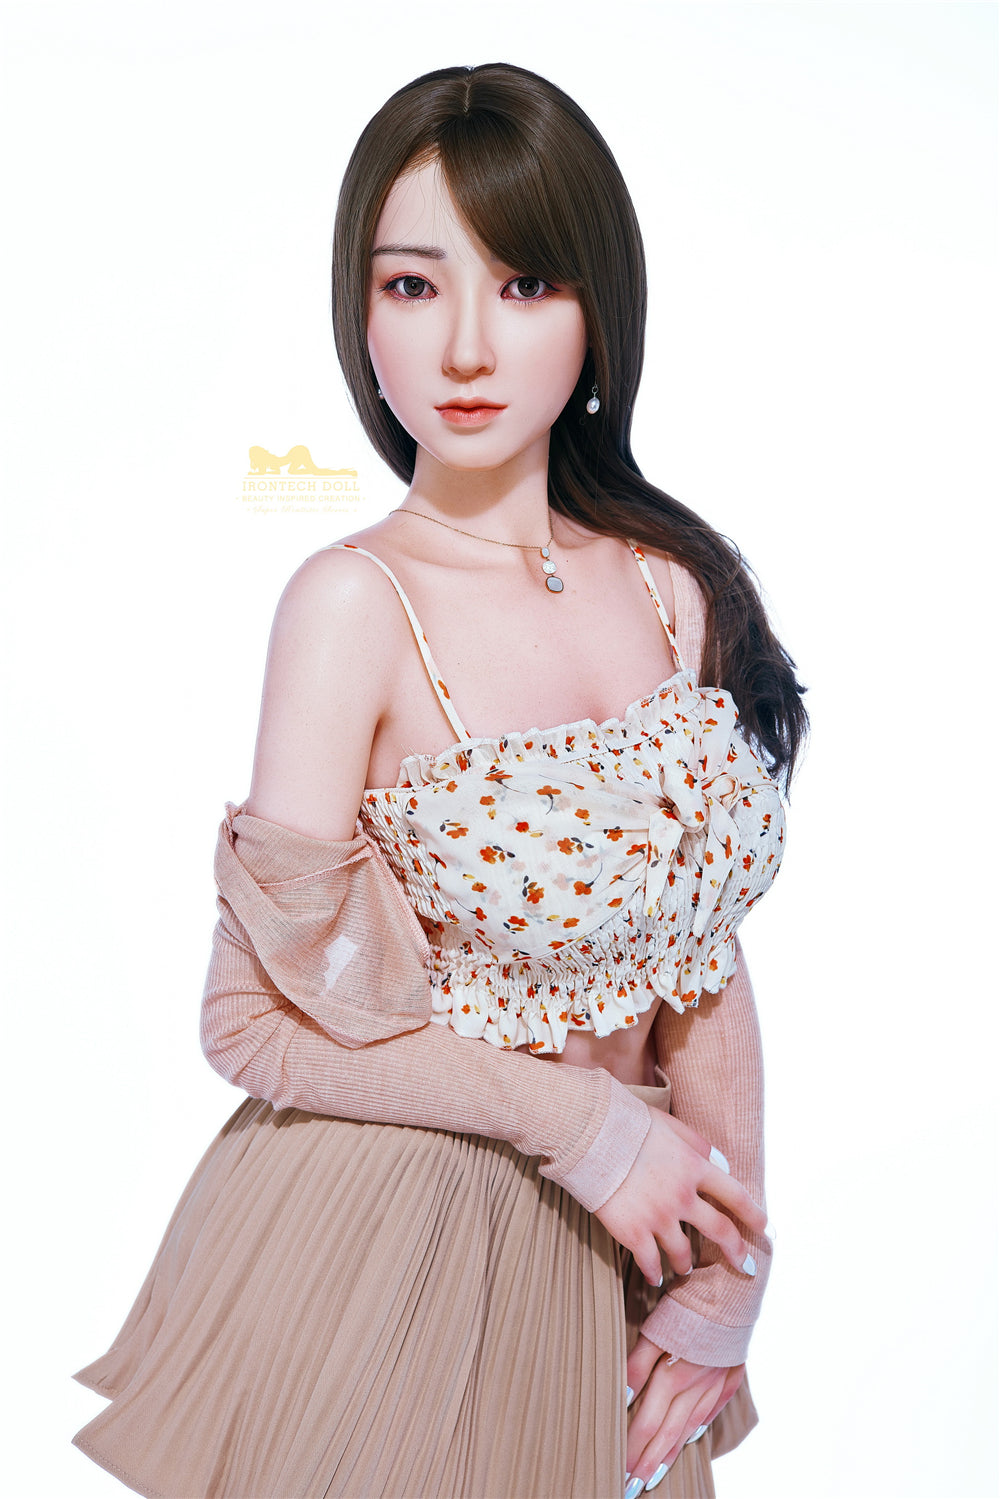 Irontech Doll 153 cm Silicone - Amalia | Buy Sex Dolls at DOLLS ACTUALLY